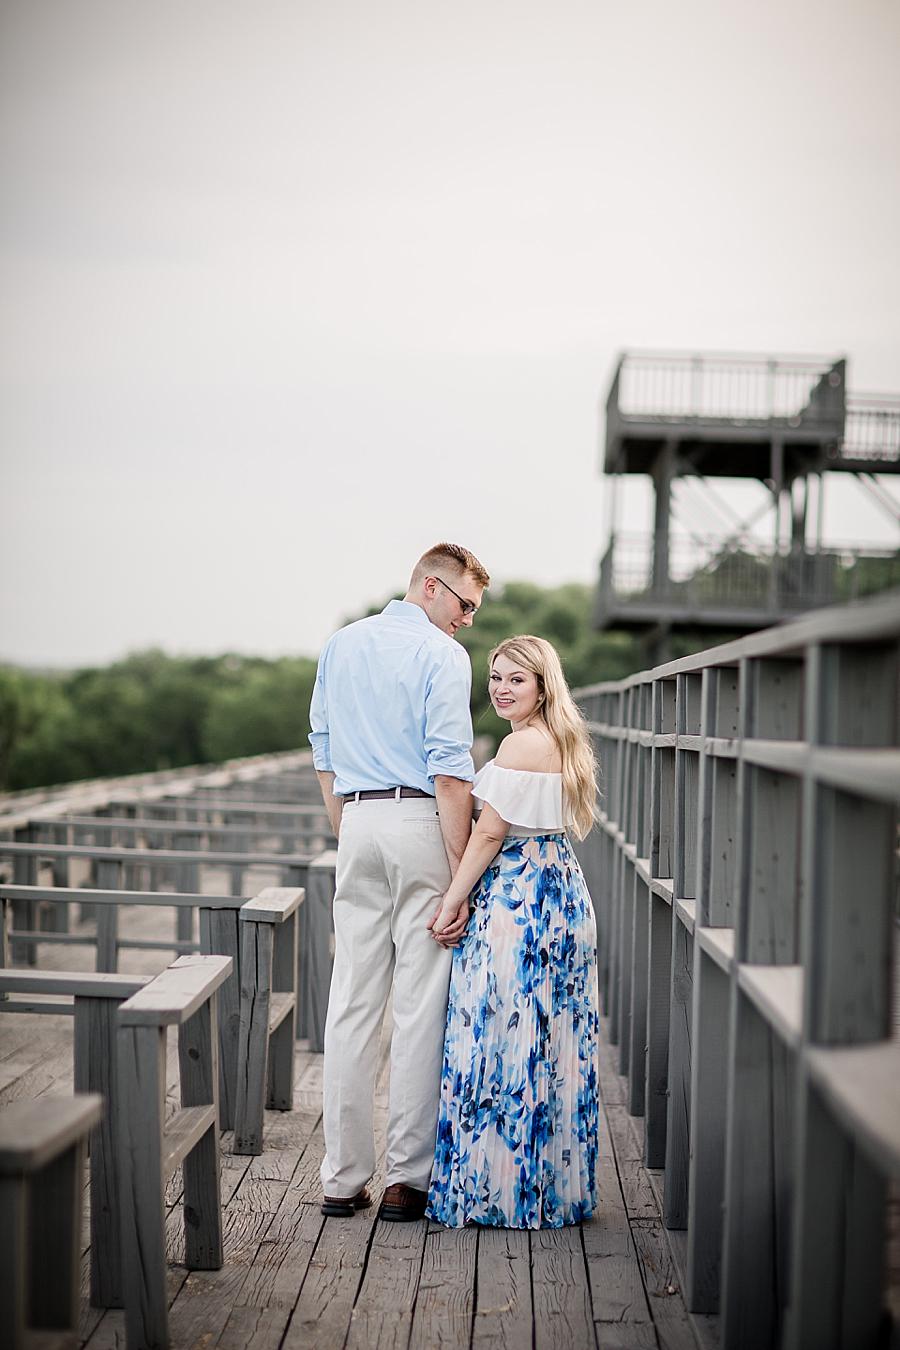 Floral dress at this Percy Warner Engagement Session by Knoxville Wedding Photographer, Amanda May Photos.